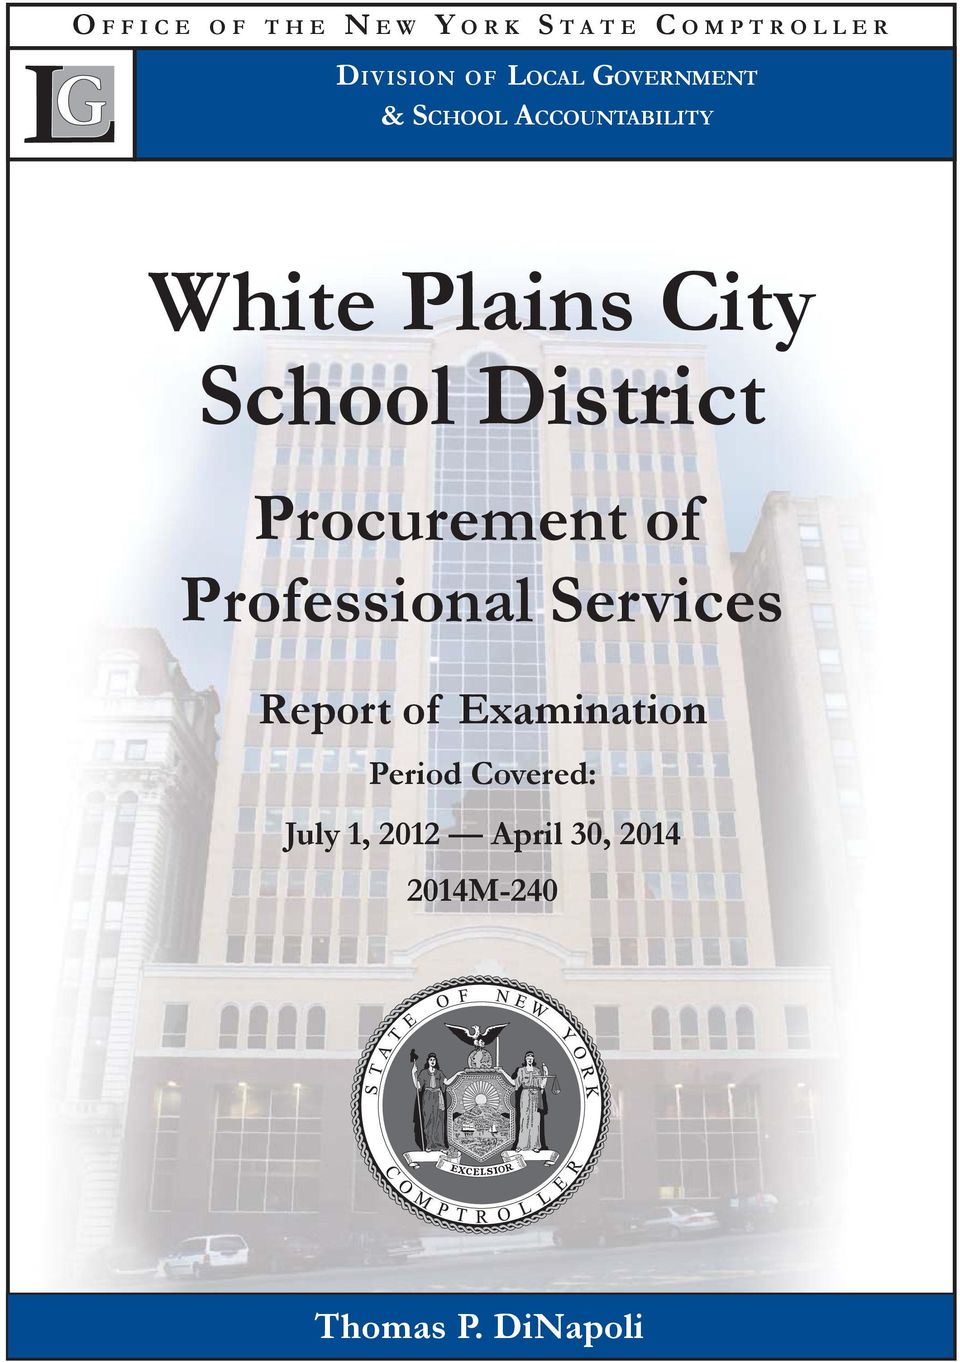 District Procurement of Professional Services Report of